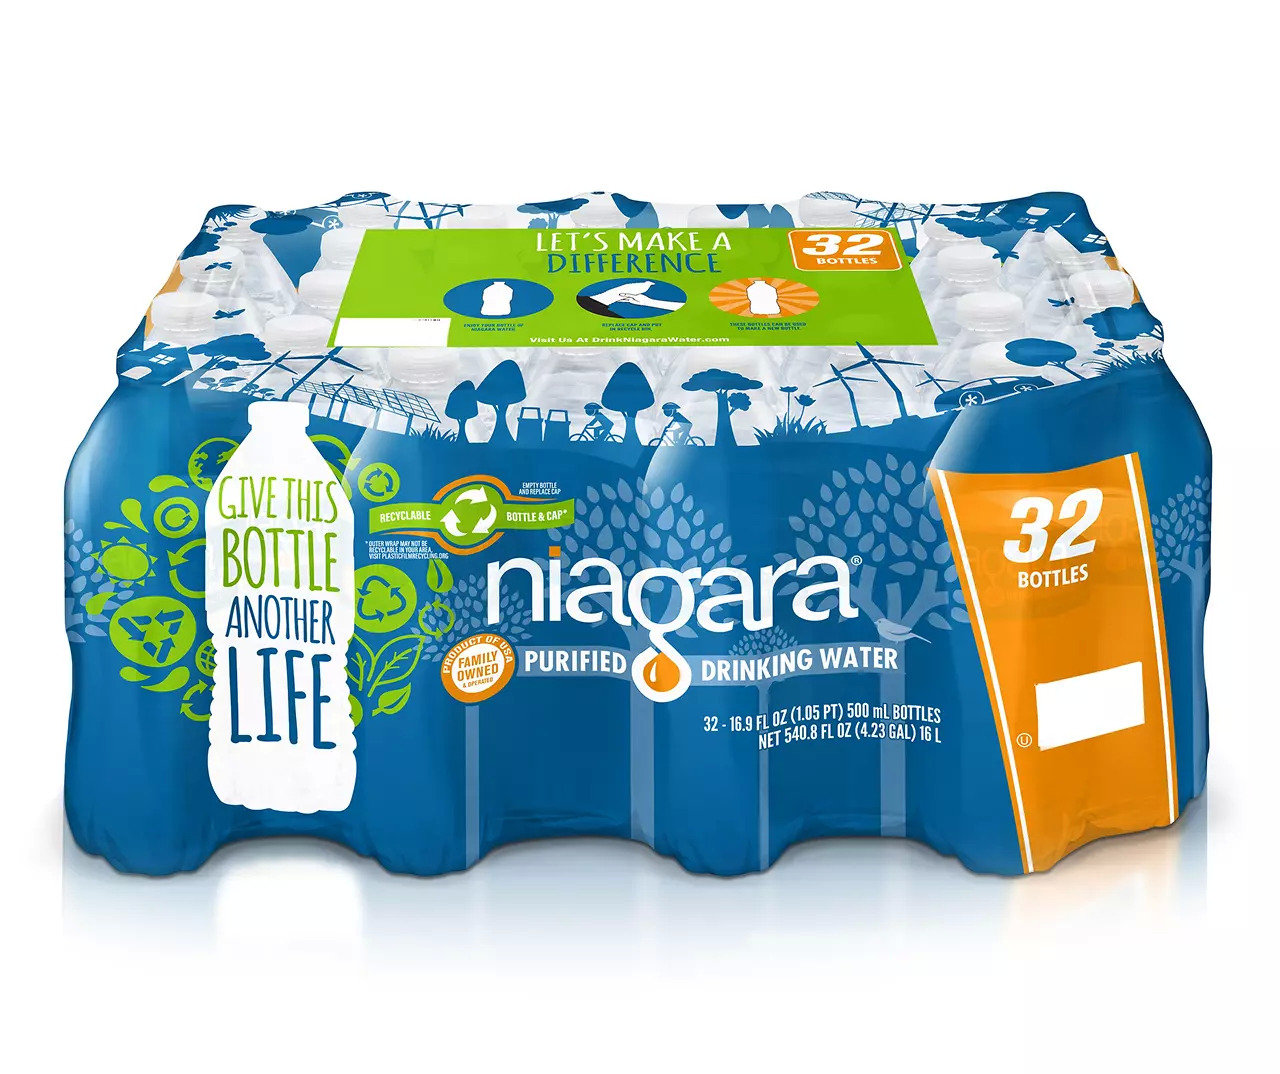 Big Lots 3-Pack of 32 Count 16.9 Ounce Niagara Drinking Water (96- 16.9oz bottles) $11.00